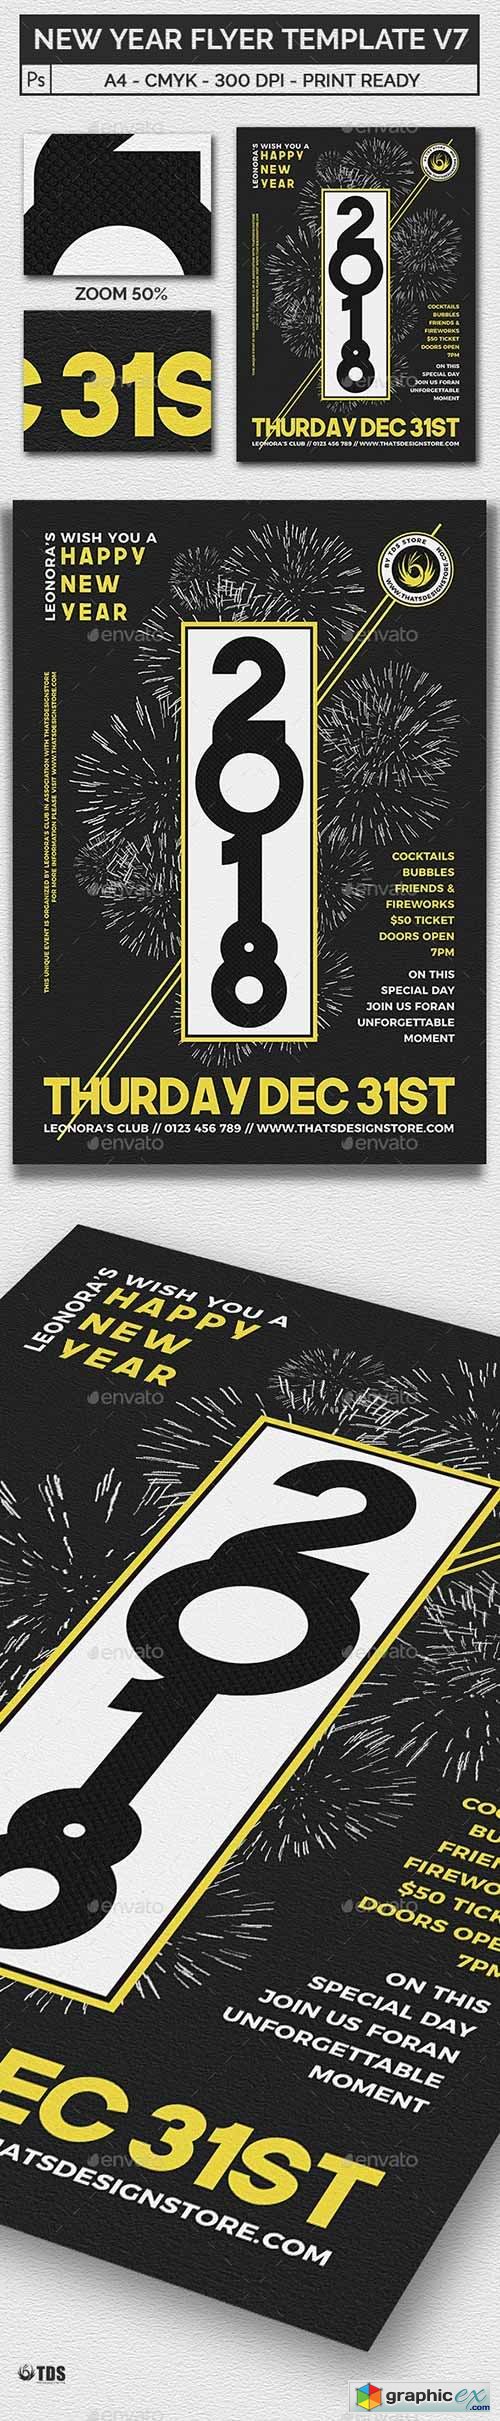 New Year Flyer Template V7